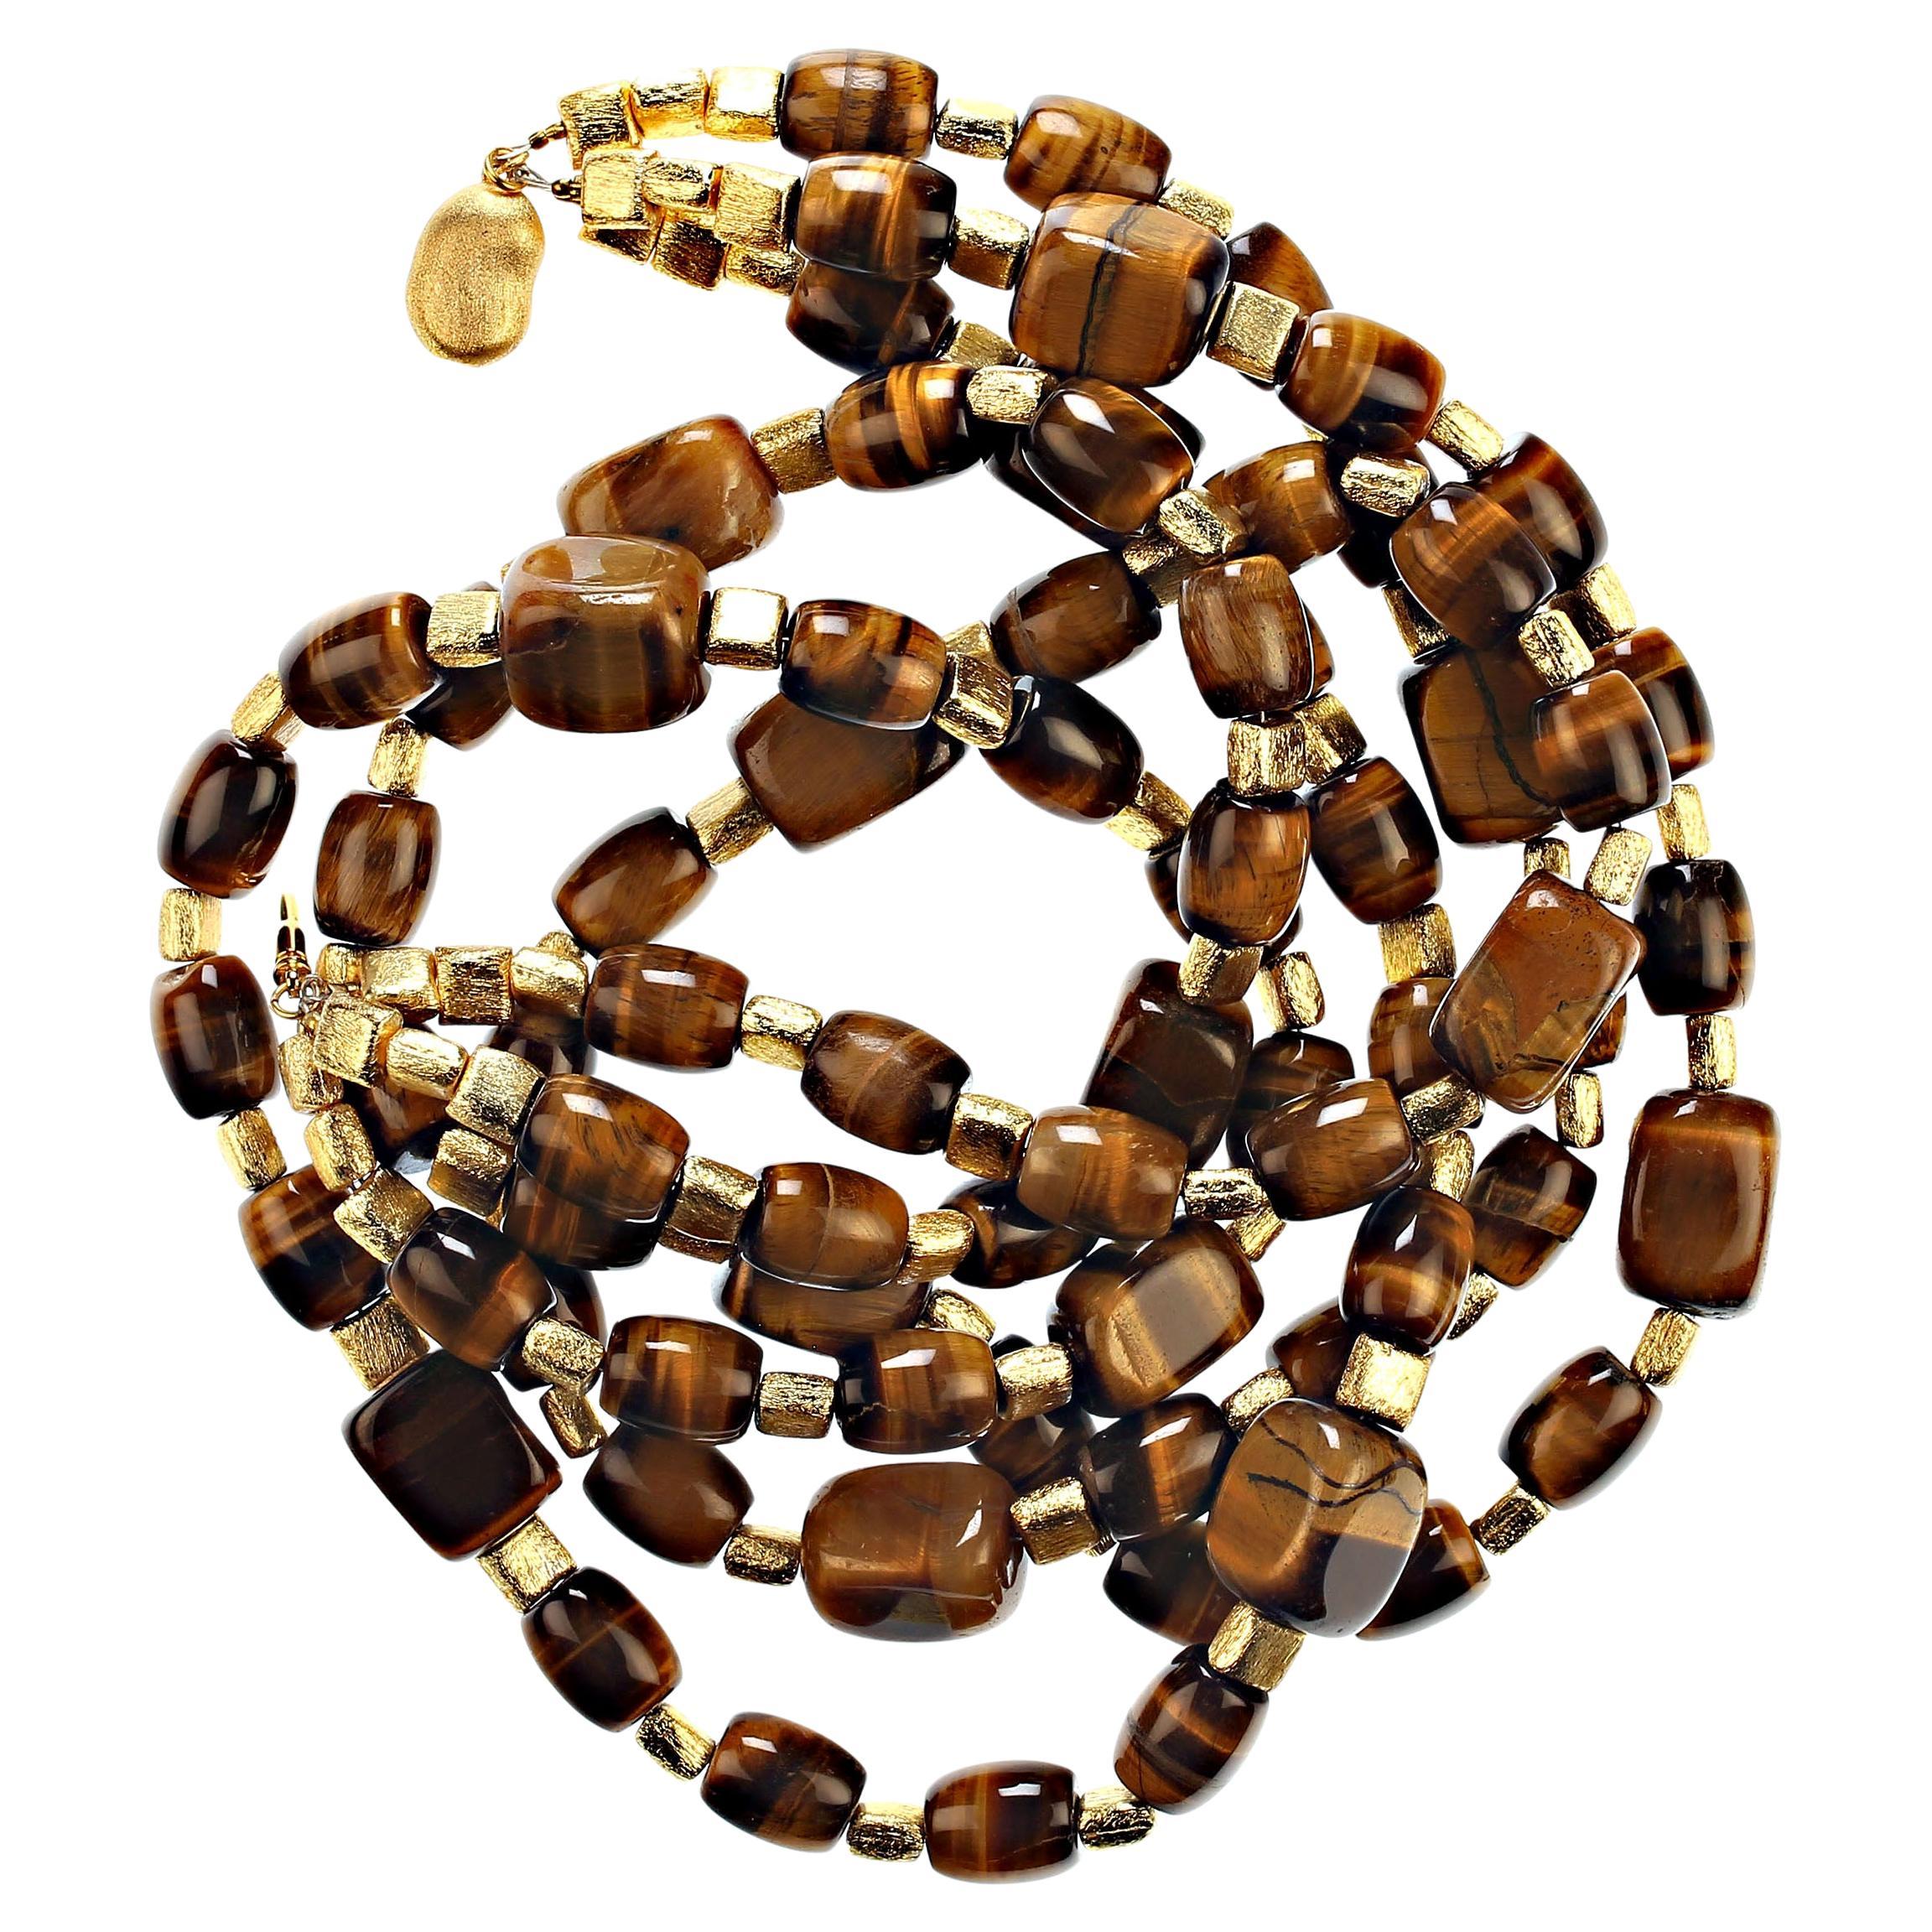 This is a custom made Tiger's Eye Necklace in three strands of eye popping glowing, chatoyant Tiger's Eye. The unusual  barrel and curb shapes with brushed gold tone accents create a unique and pleasing combination of shapes. The necklace is 21